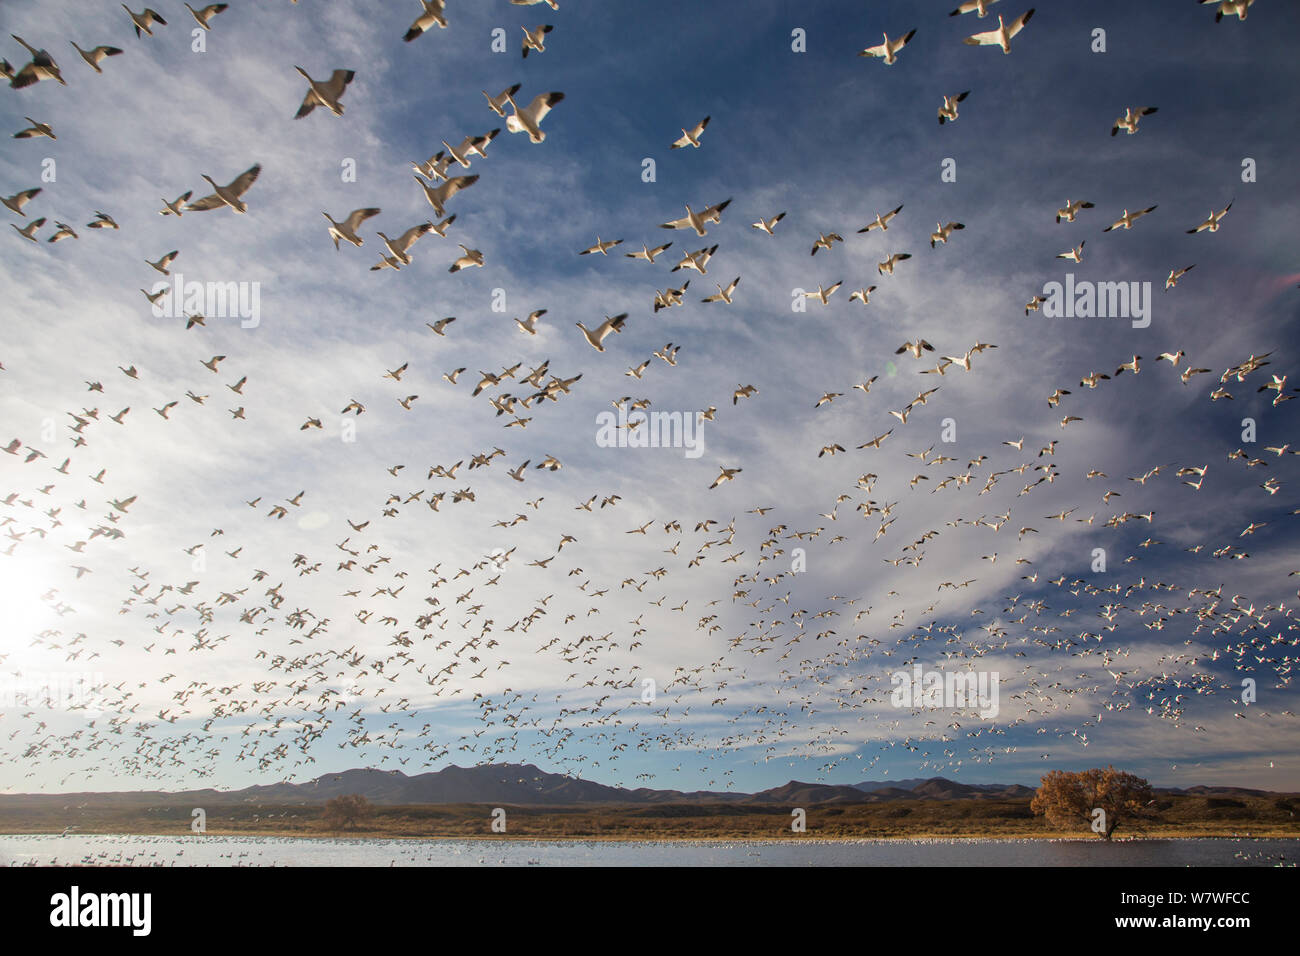 Snow Geese (Chen caerulescens) taking off en-masse in evening light, Bosque del Apache, New Mexico, USA, December. Stock Photo